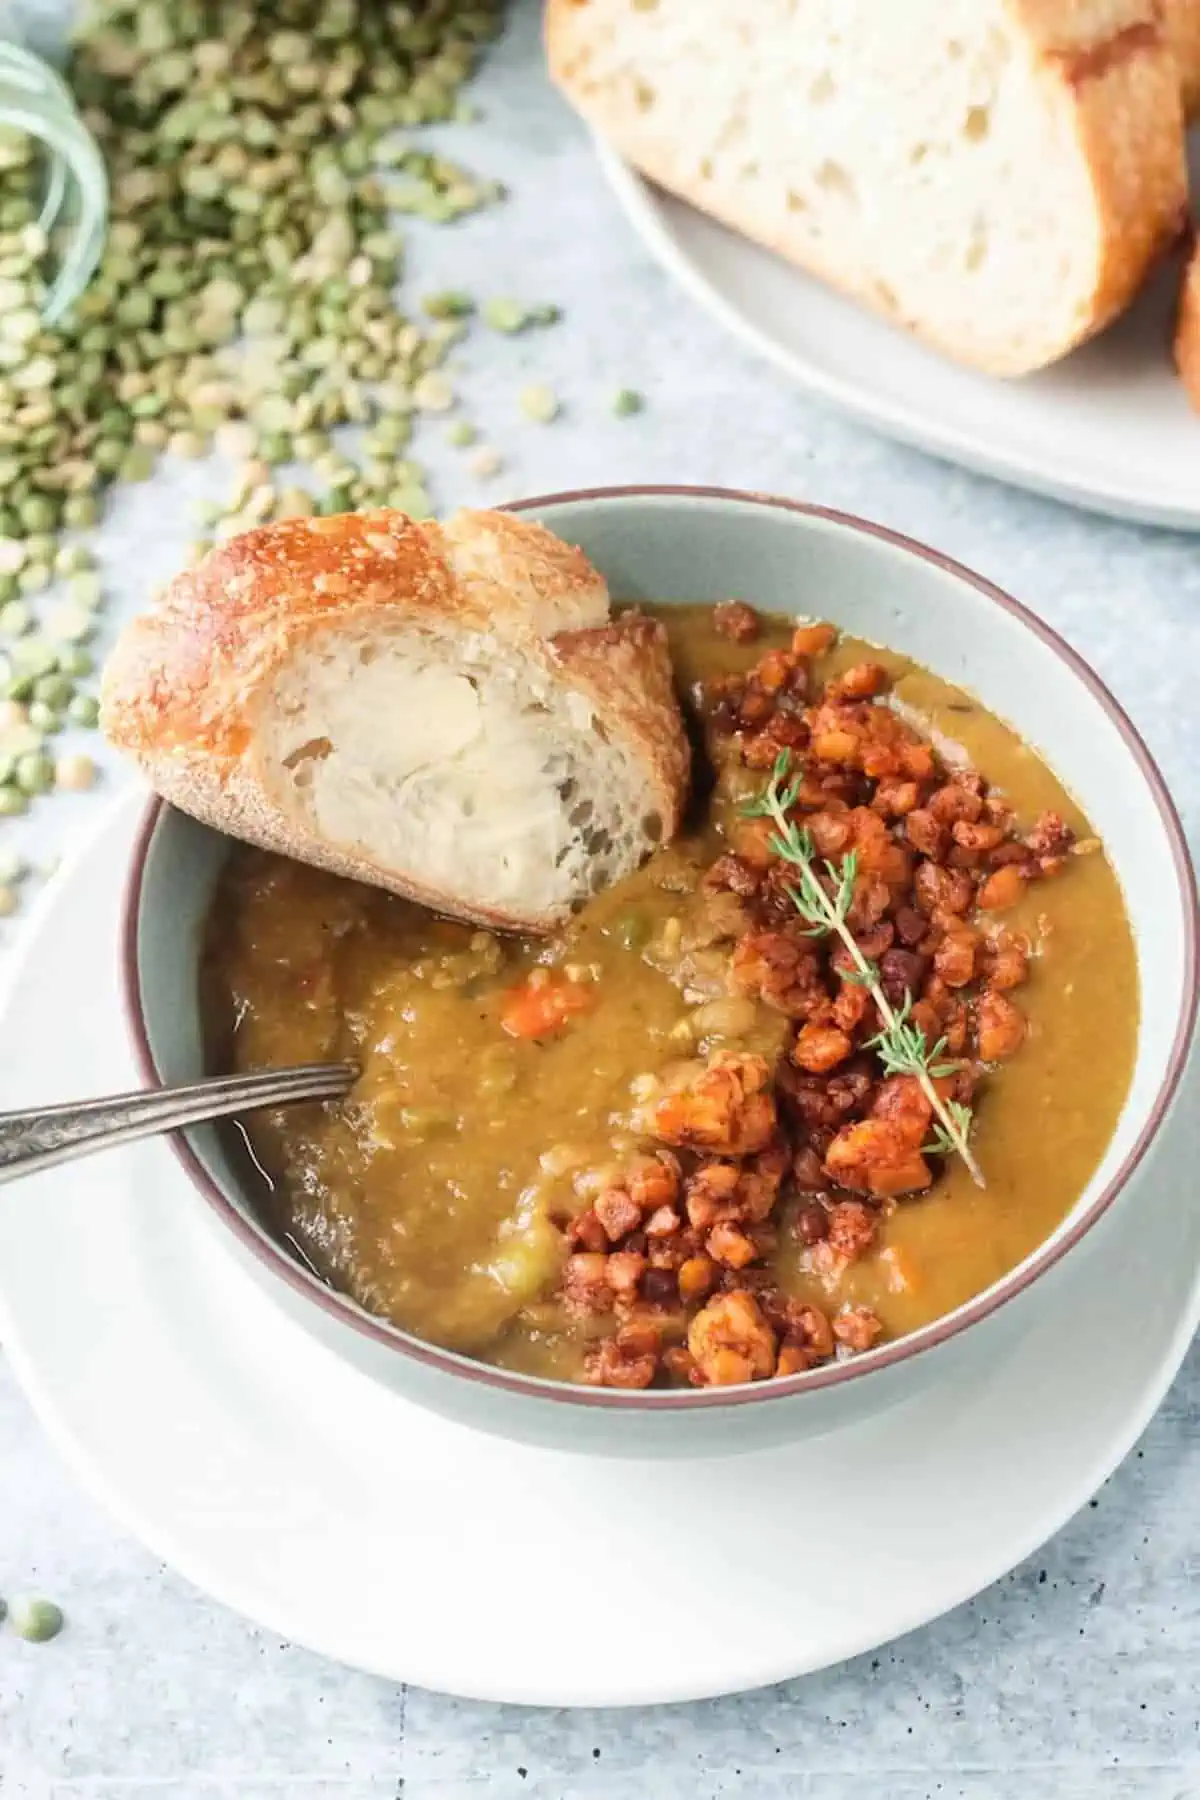 A bowl of vegan split pea soup served with tempeh crumbles and a slice of crusty bread.